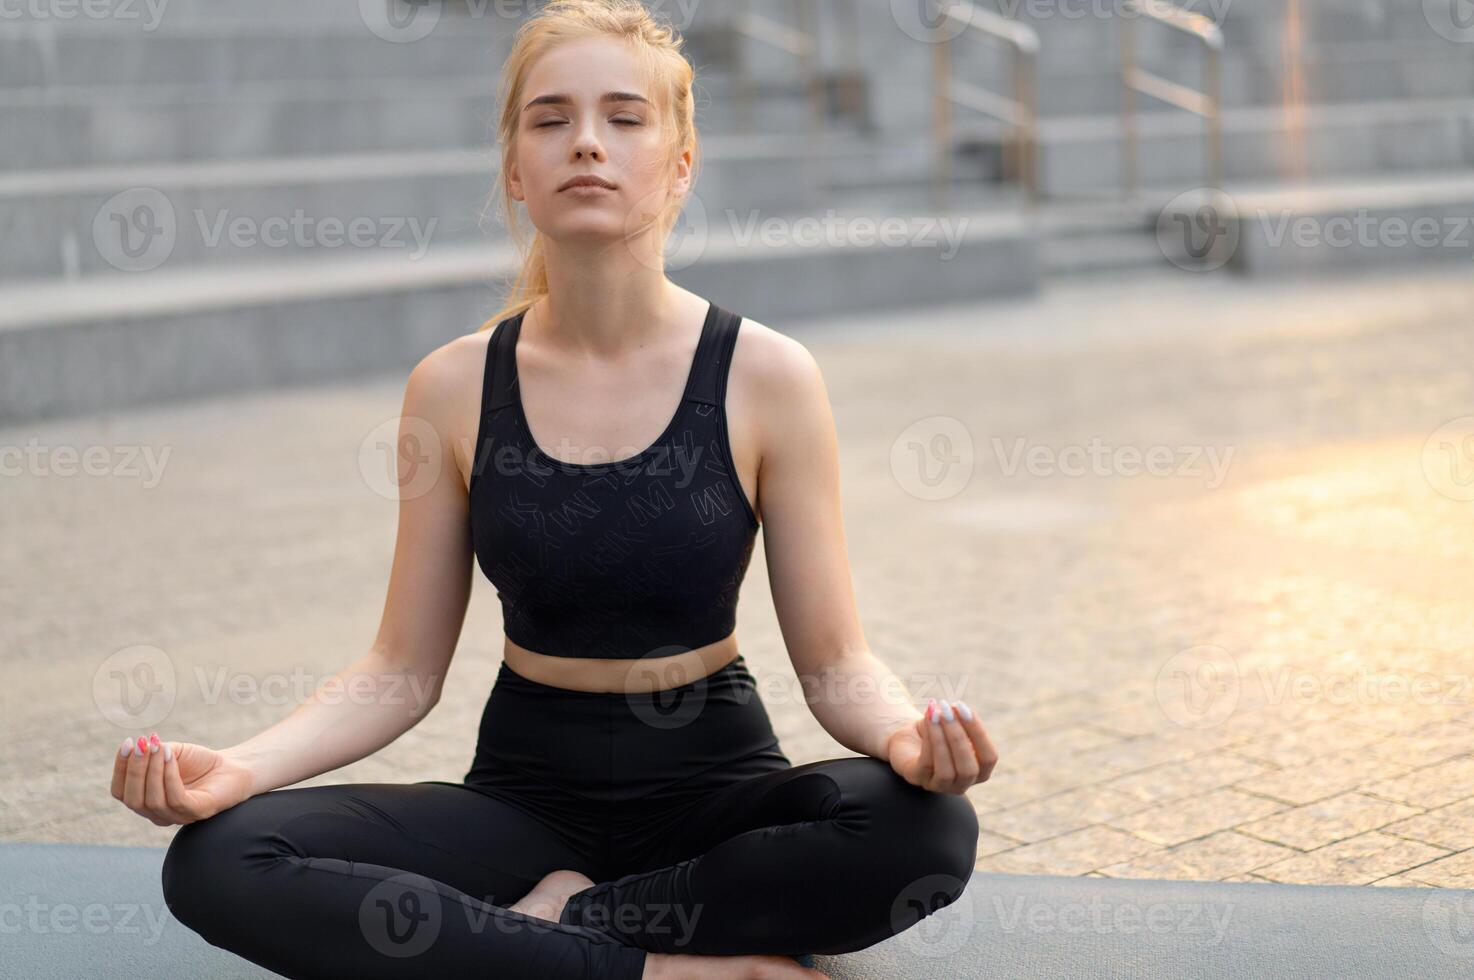 Yoga and Meditation in Modern City Caucasian Woman Relax Lotus Position Sitting Yoga Mat Outdoors Summer Park on Concrete floor photo